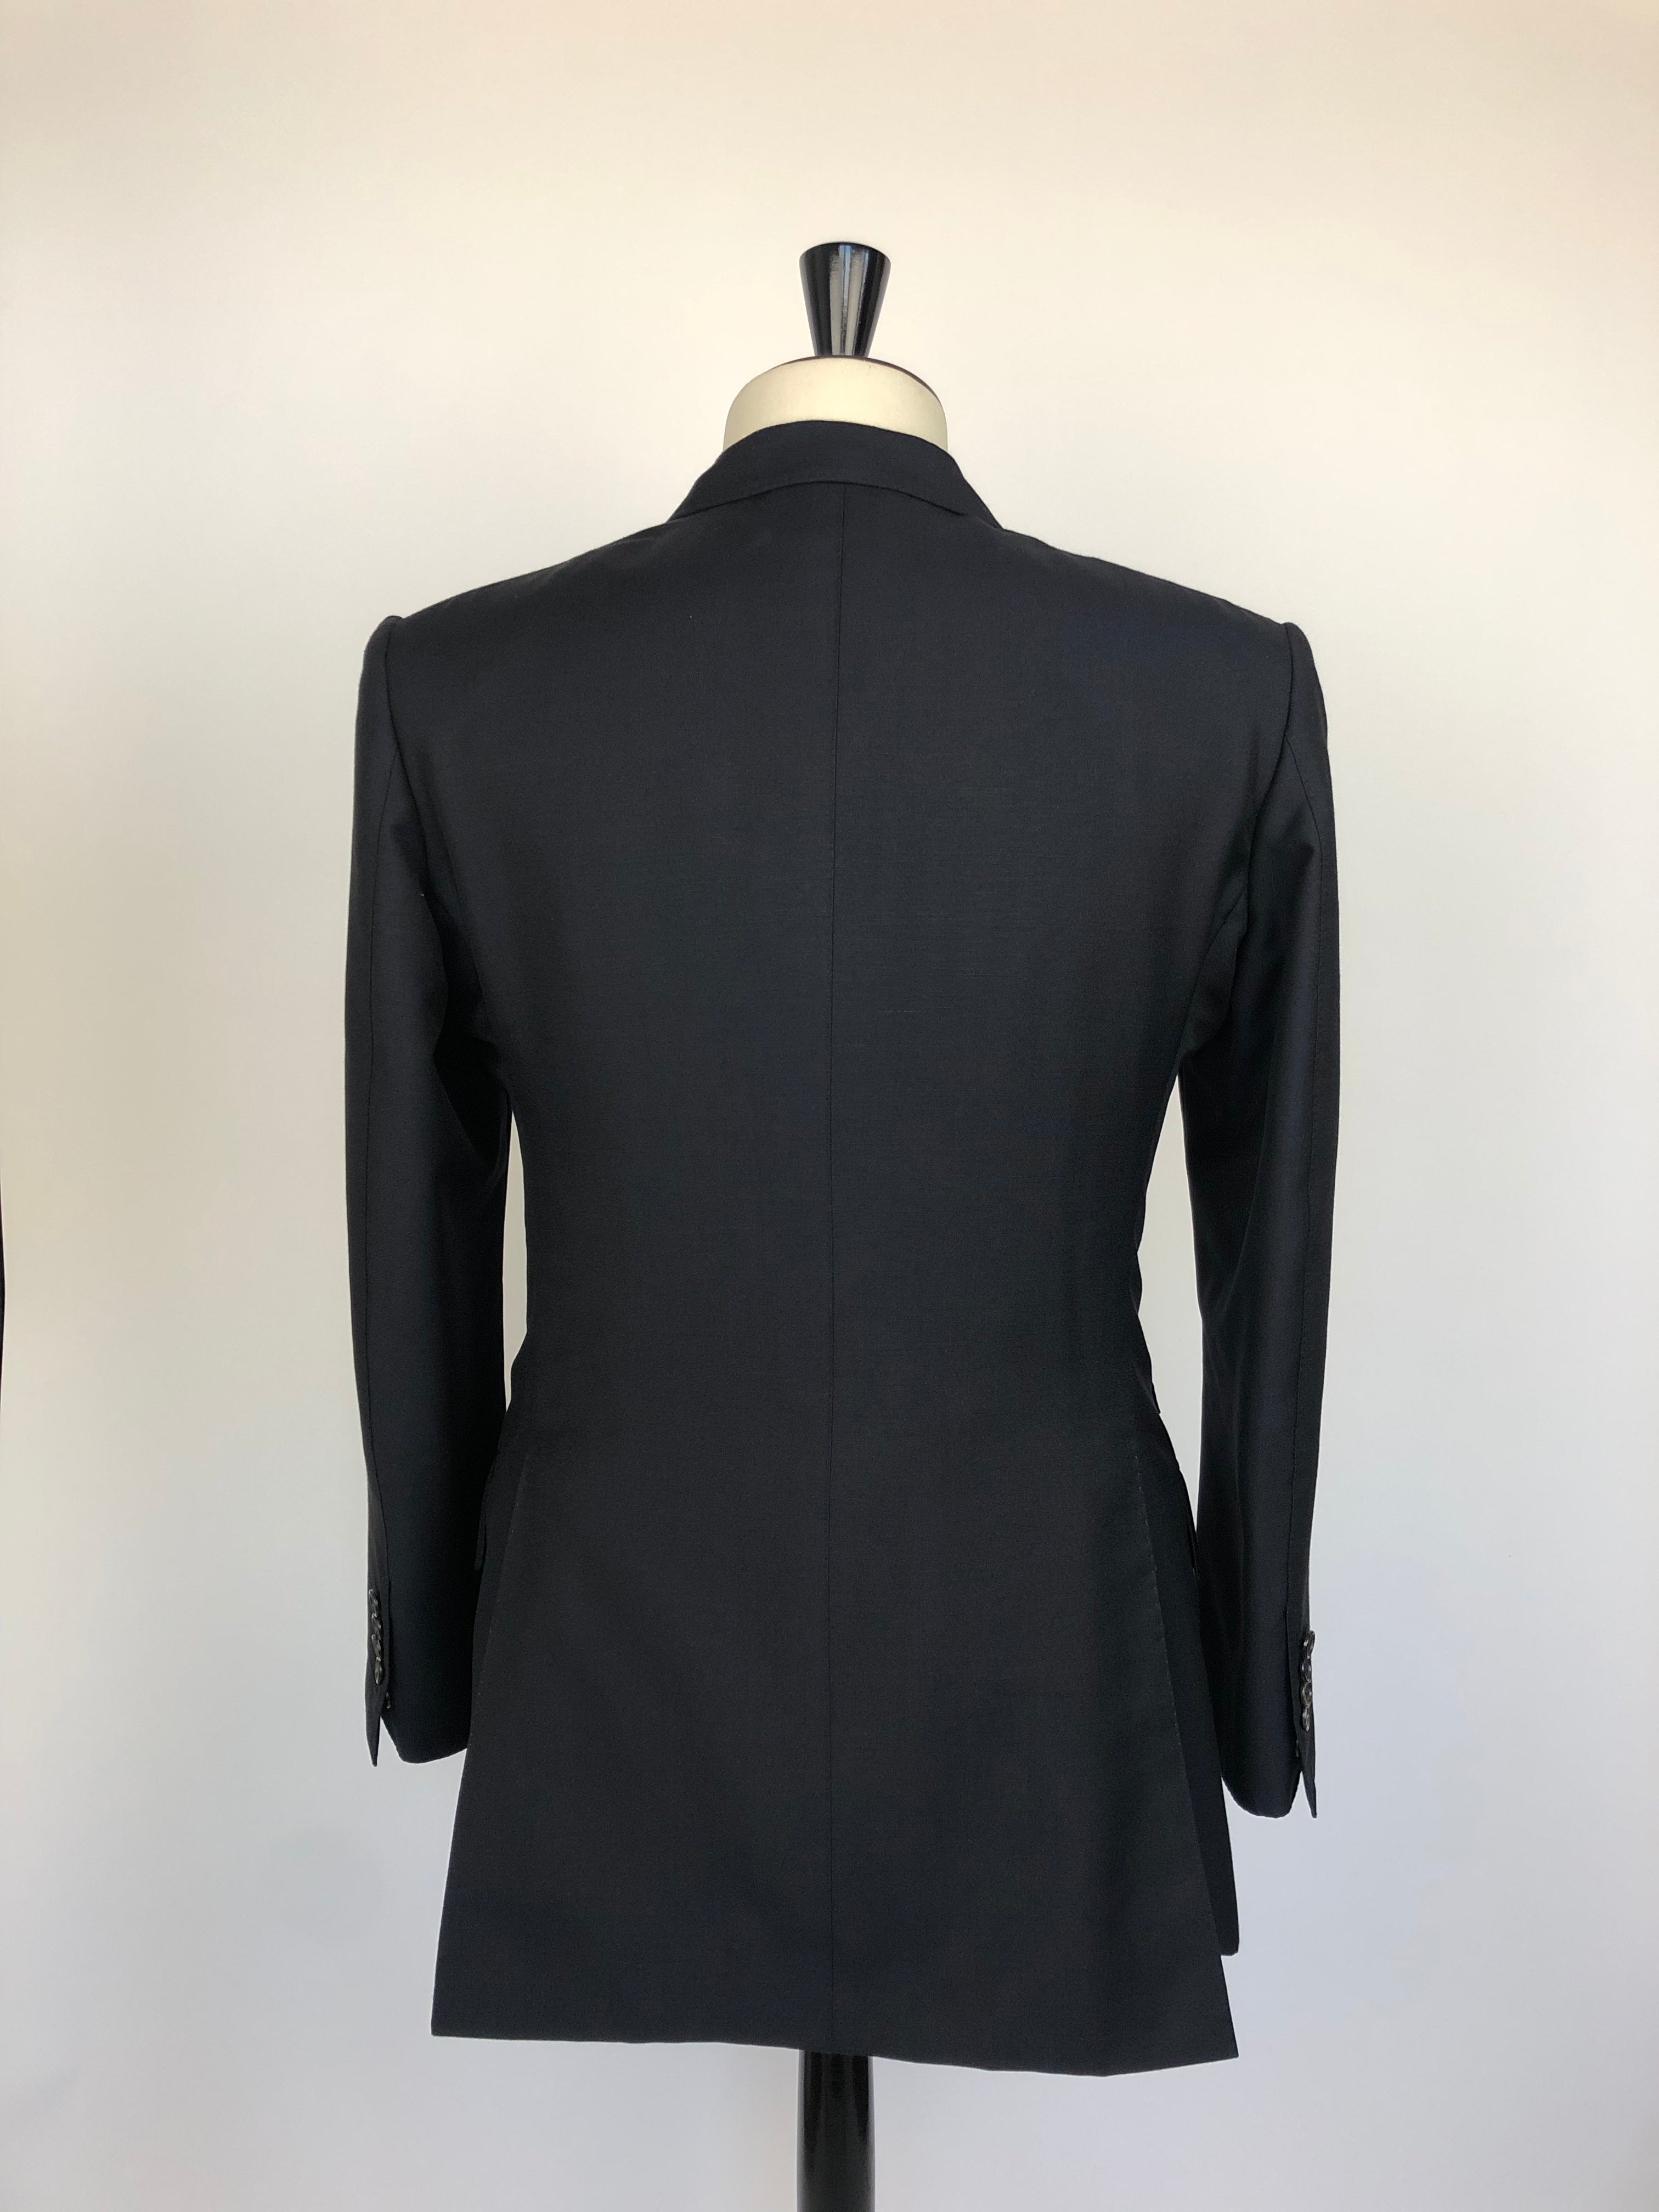 Tom Ford Navy Three-Piece Suit